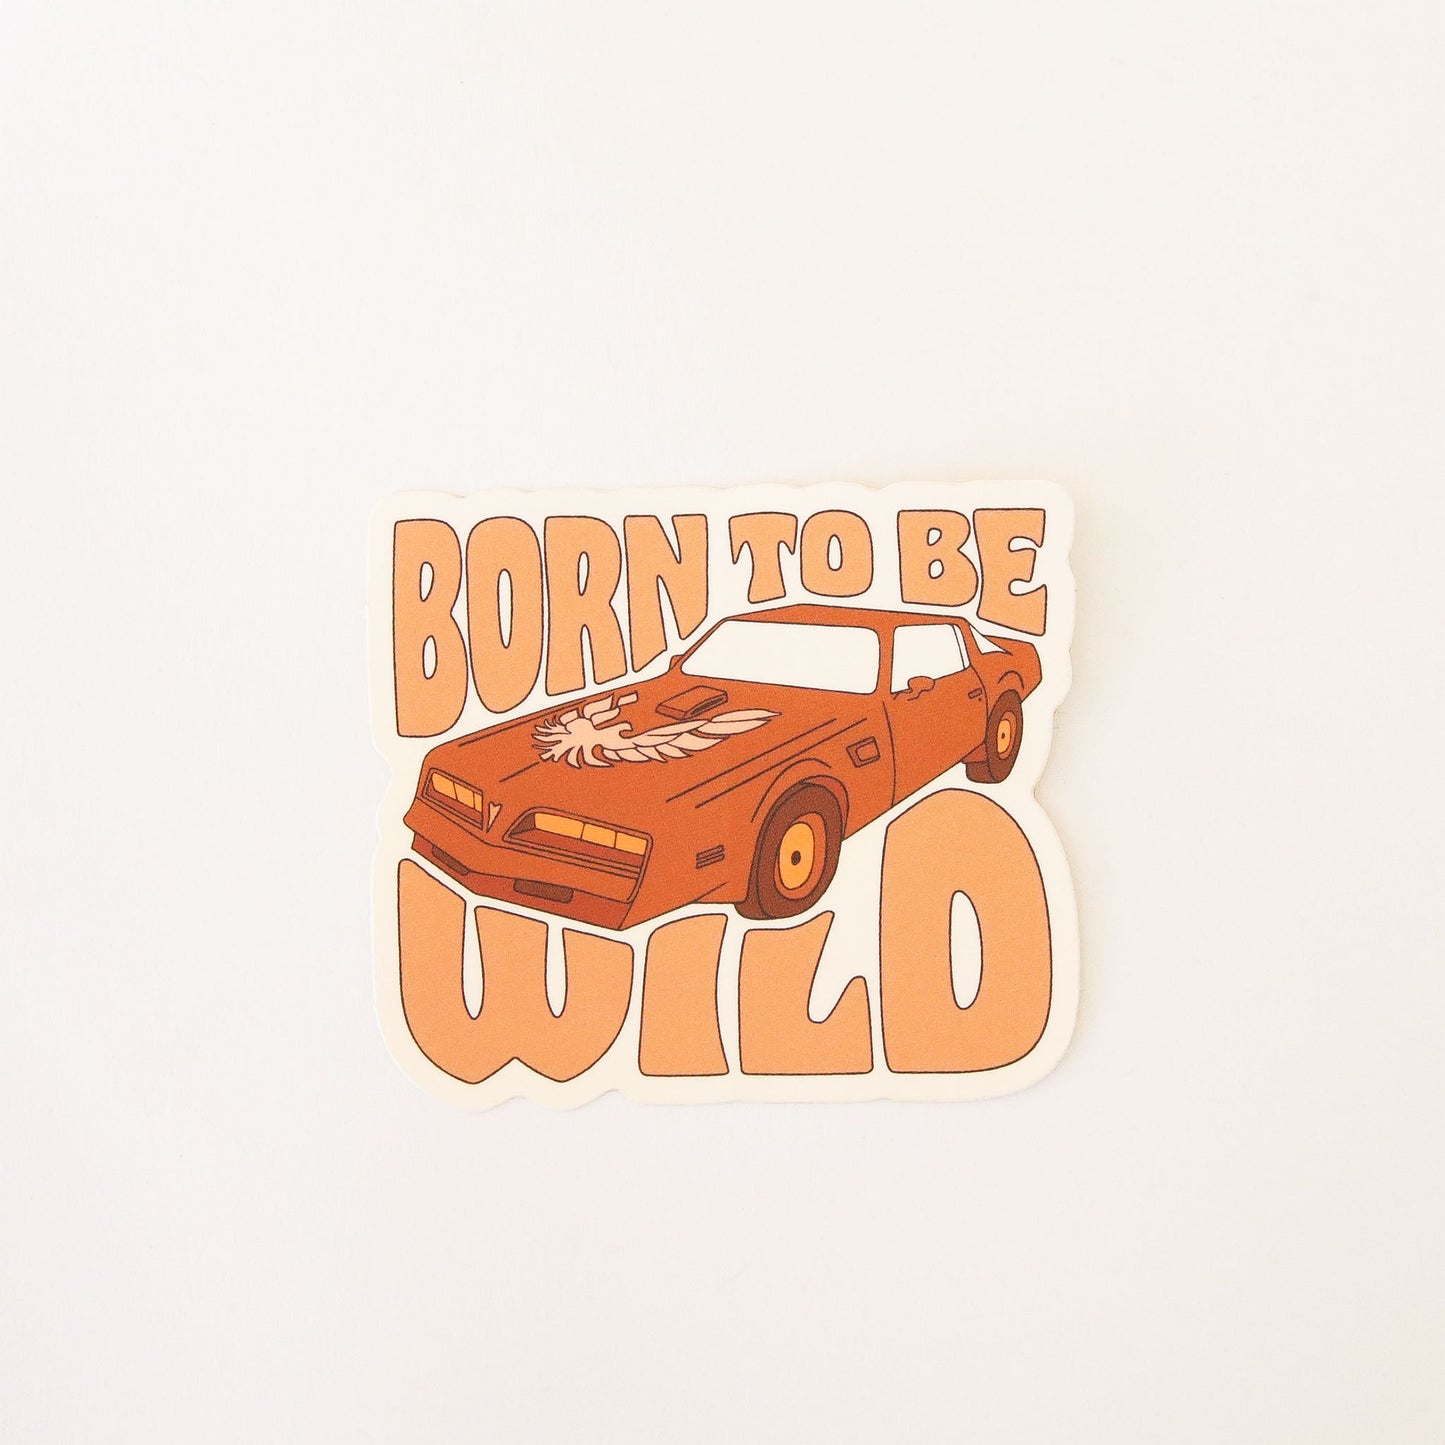 70s inspired sticker featuring an old school Ford Thunderbird car. Wrapped around the car reads 'Born to be wild' in soft orange bubble lettering.